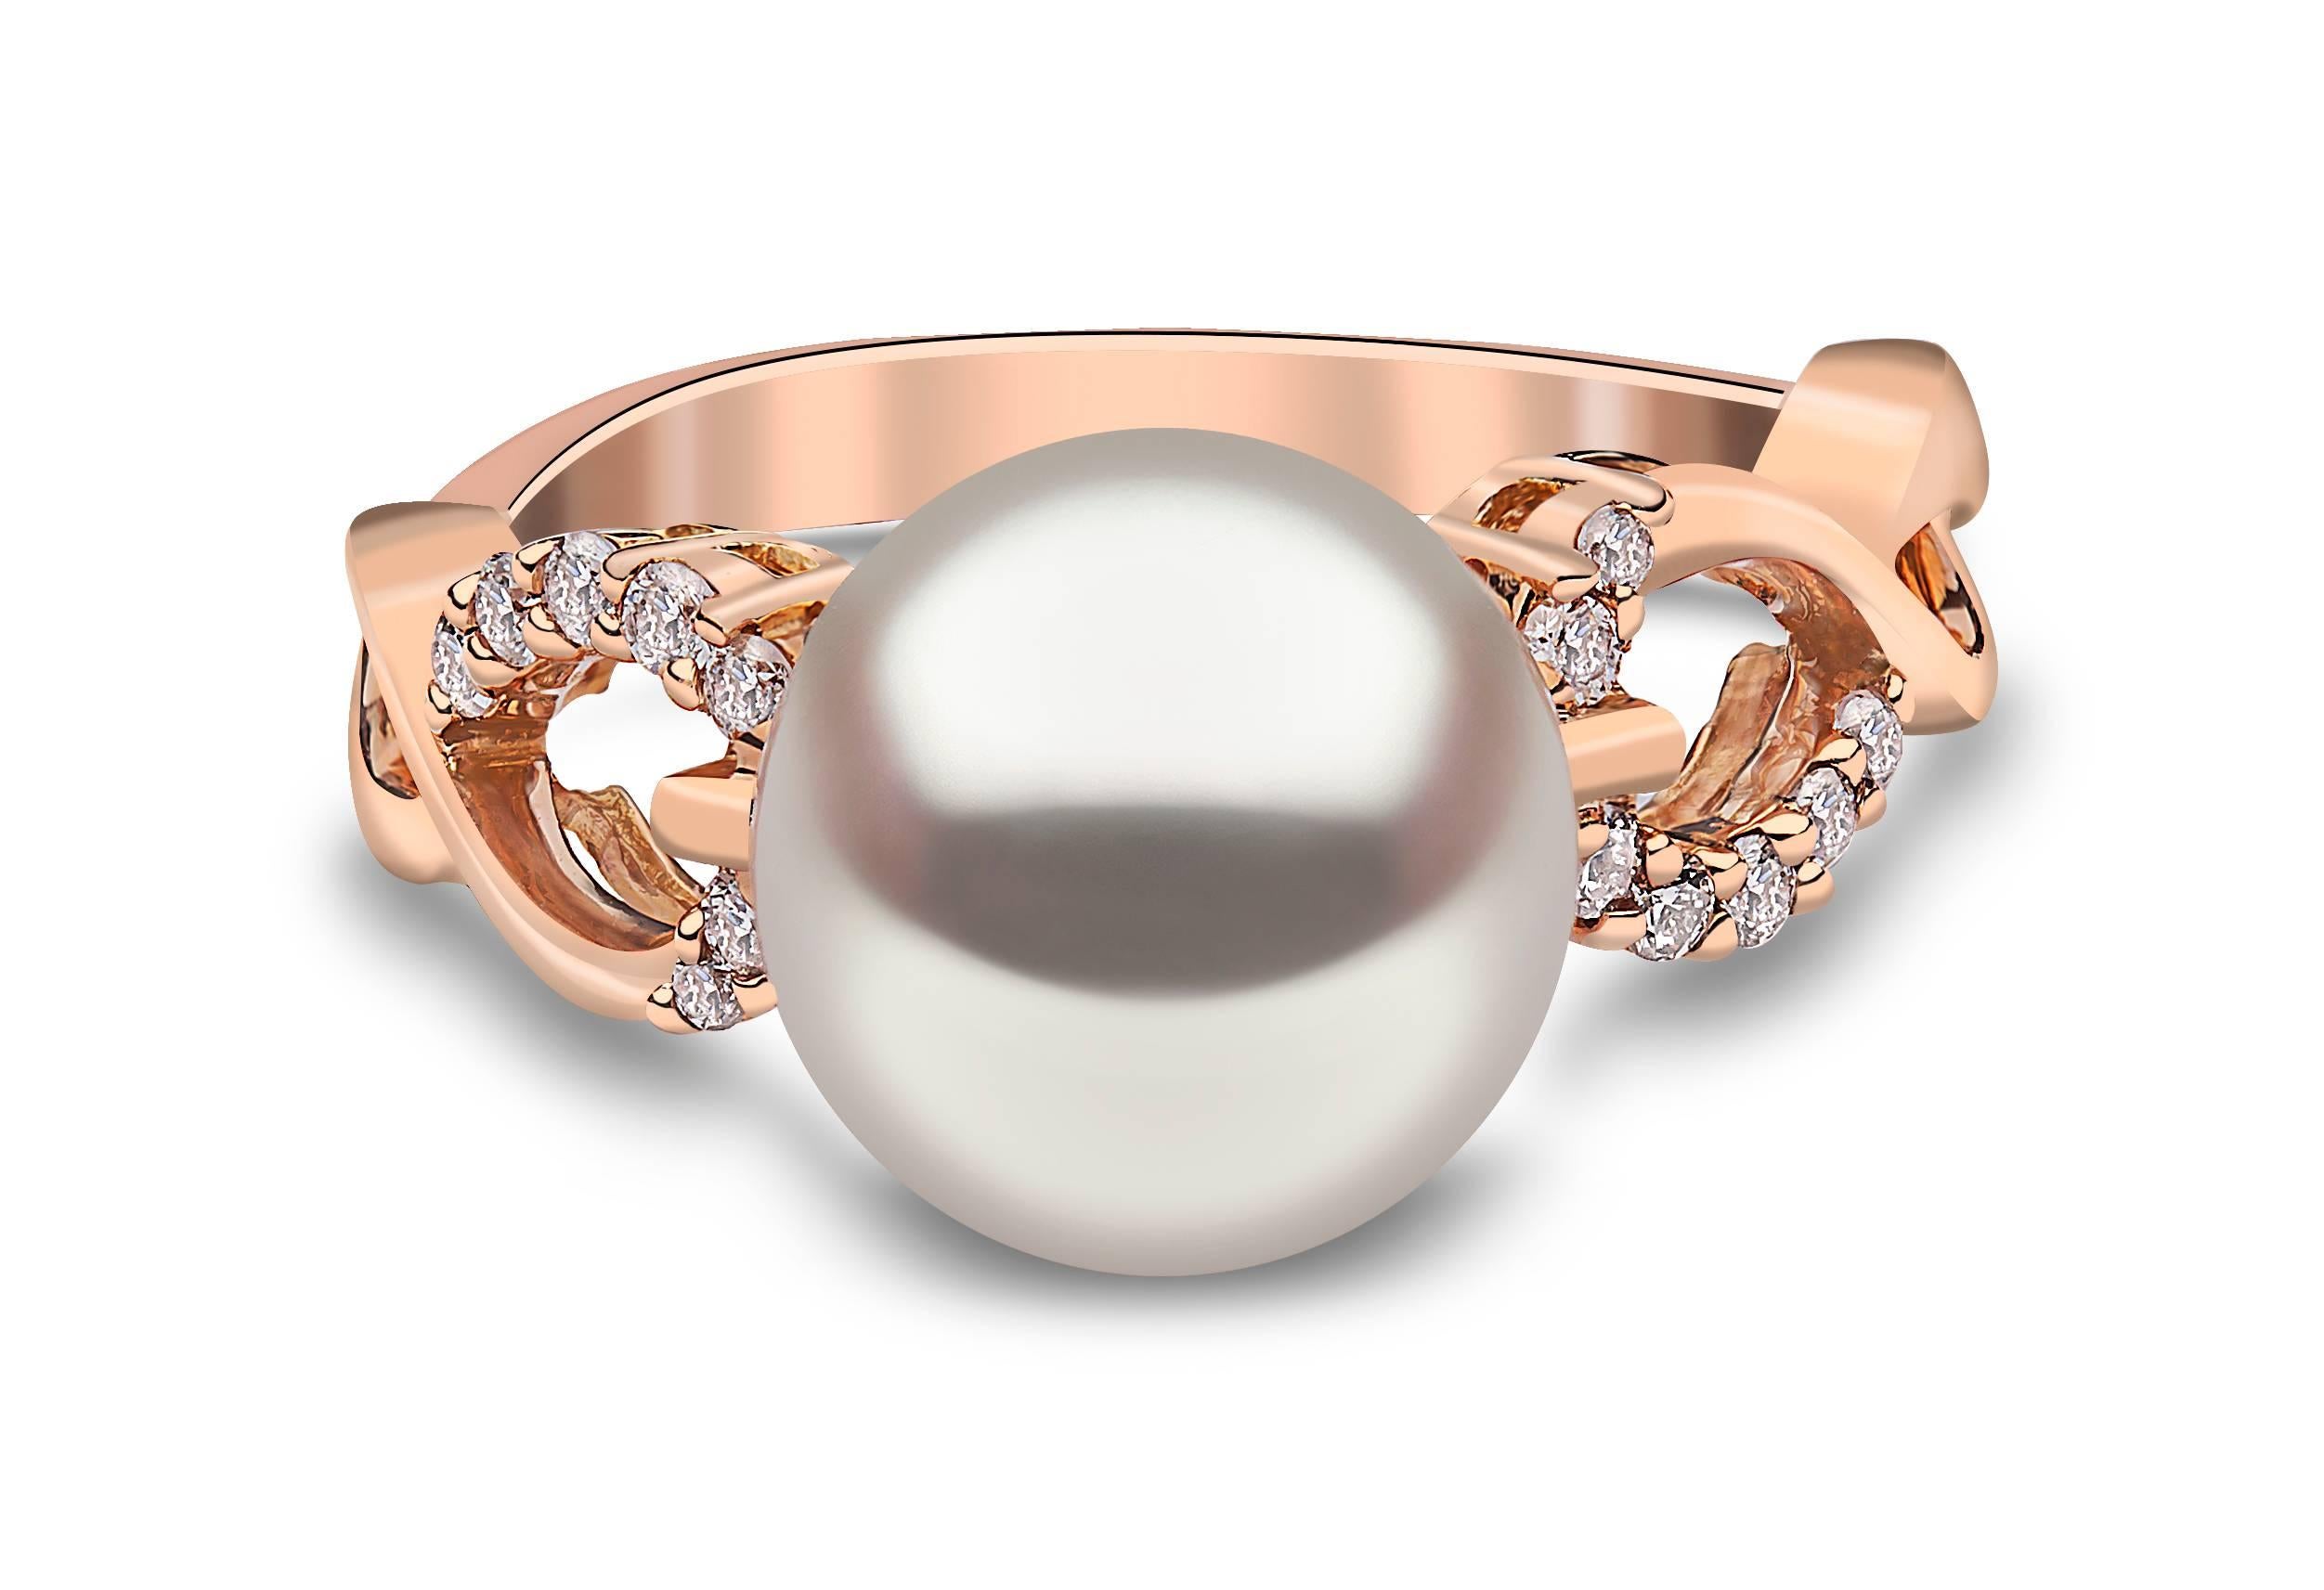 This elegant ring designed by Yoko London features a lustrous Australian South Sea pearl at its forefront, highlighting the exceptional quality of the materials. The pearl is set among a pretty pattern of intertwining 18 Karat rose gold, bejewelled